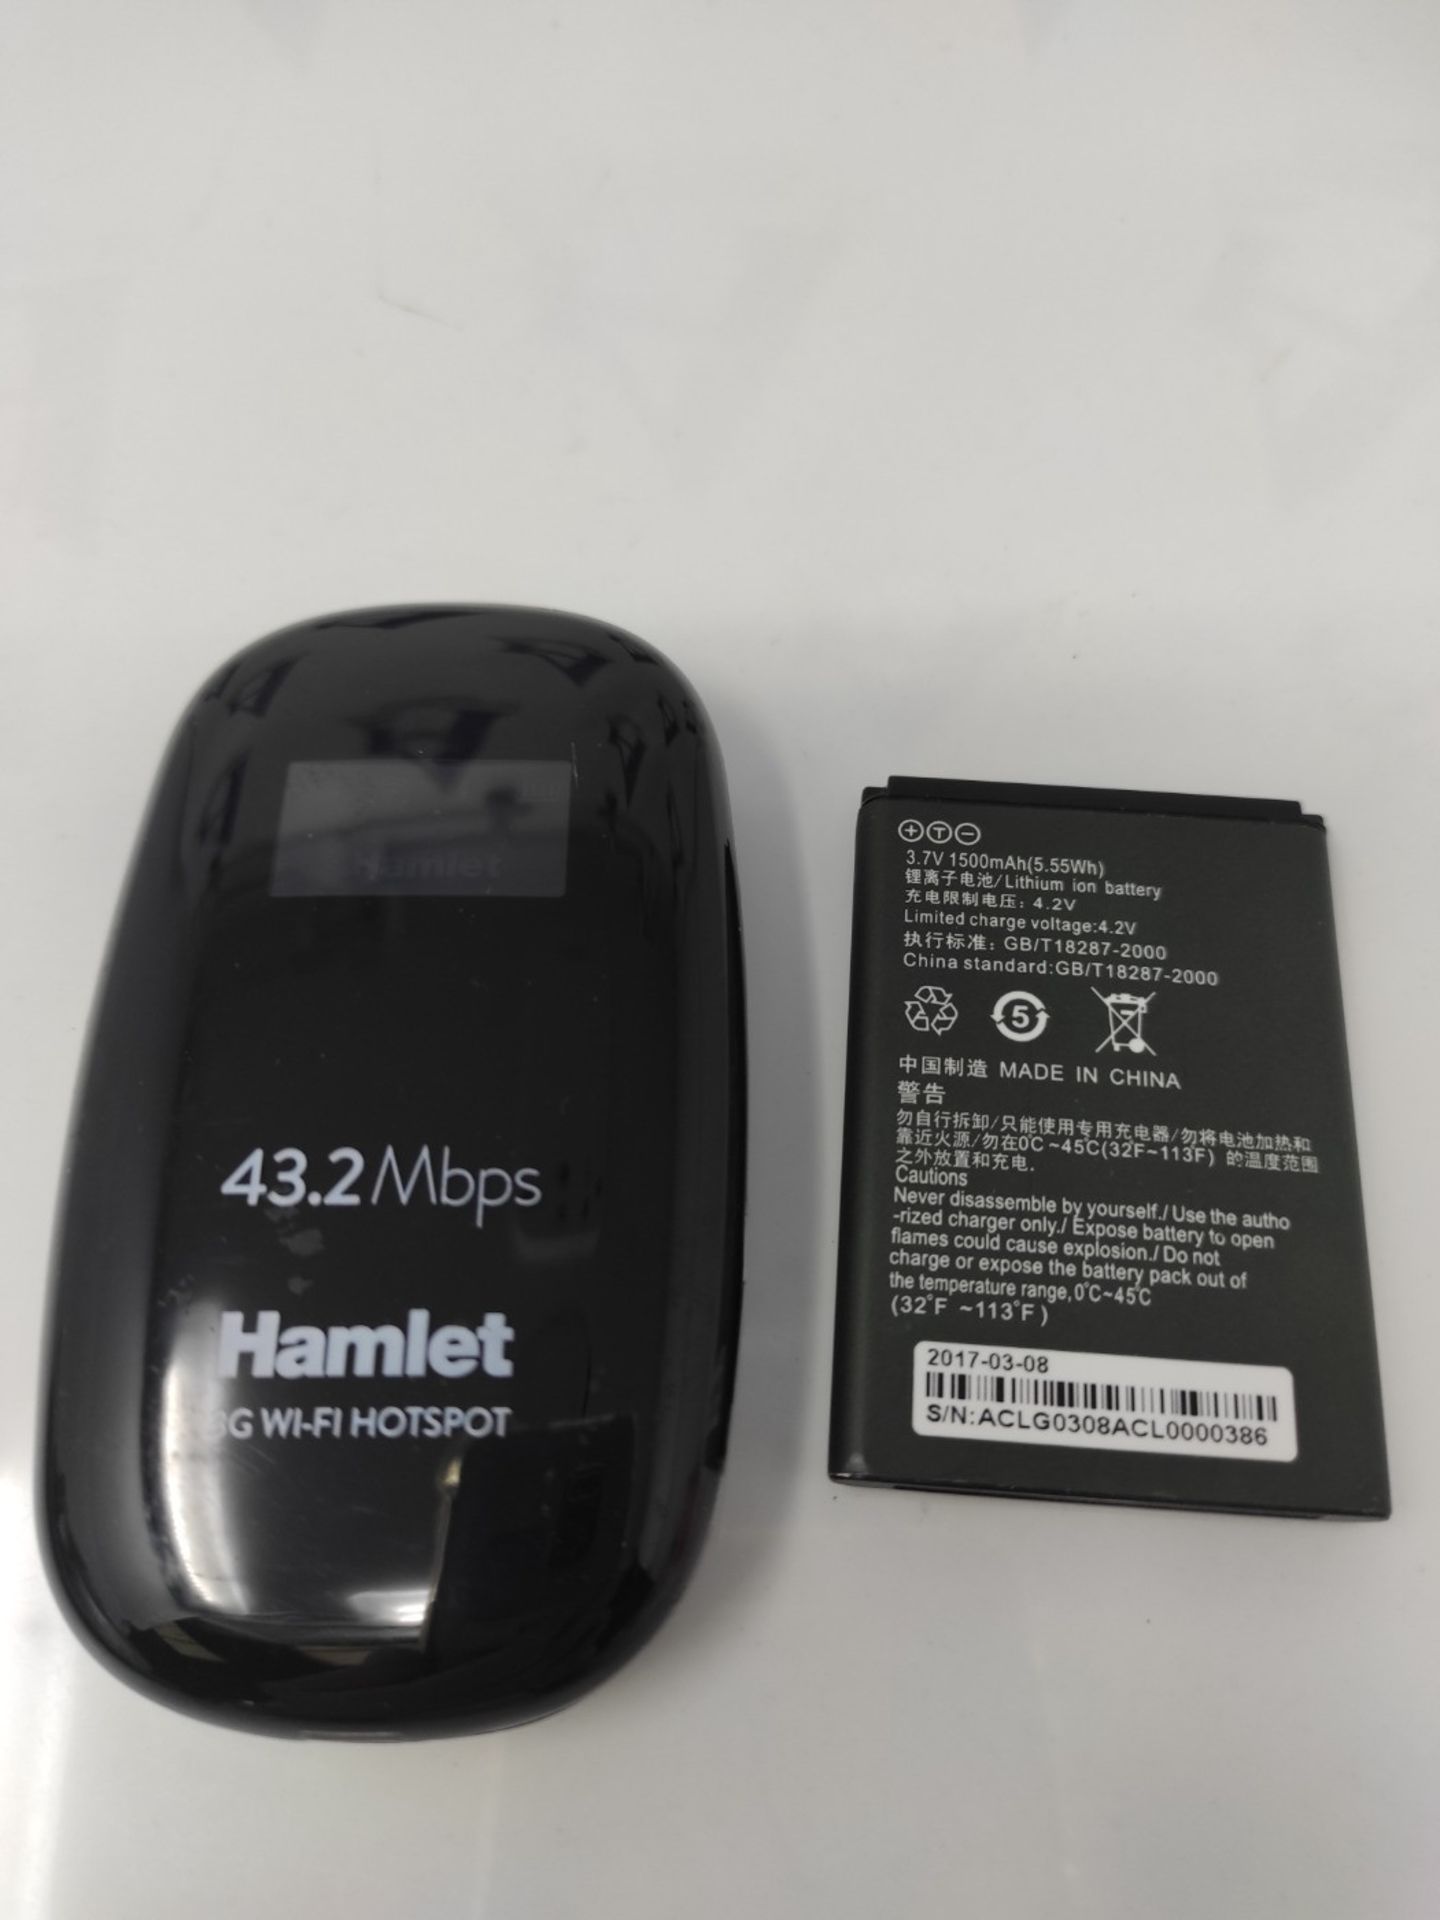 Hamlet HHTSPT3GM42 Router HotSpot 3G GSM 43.2 Mbps with SIM card slot, OLED display, a - Image 2 of 2